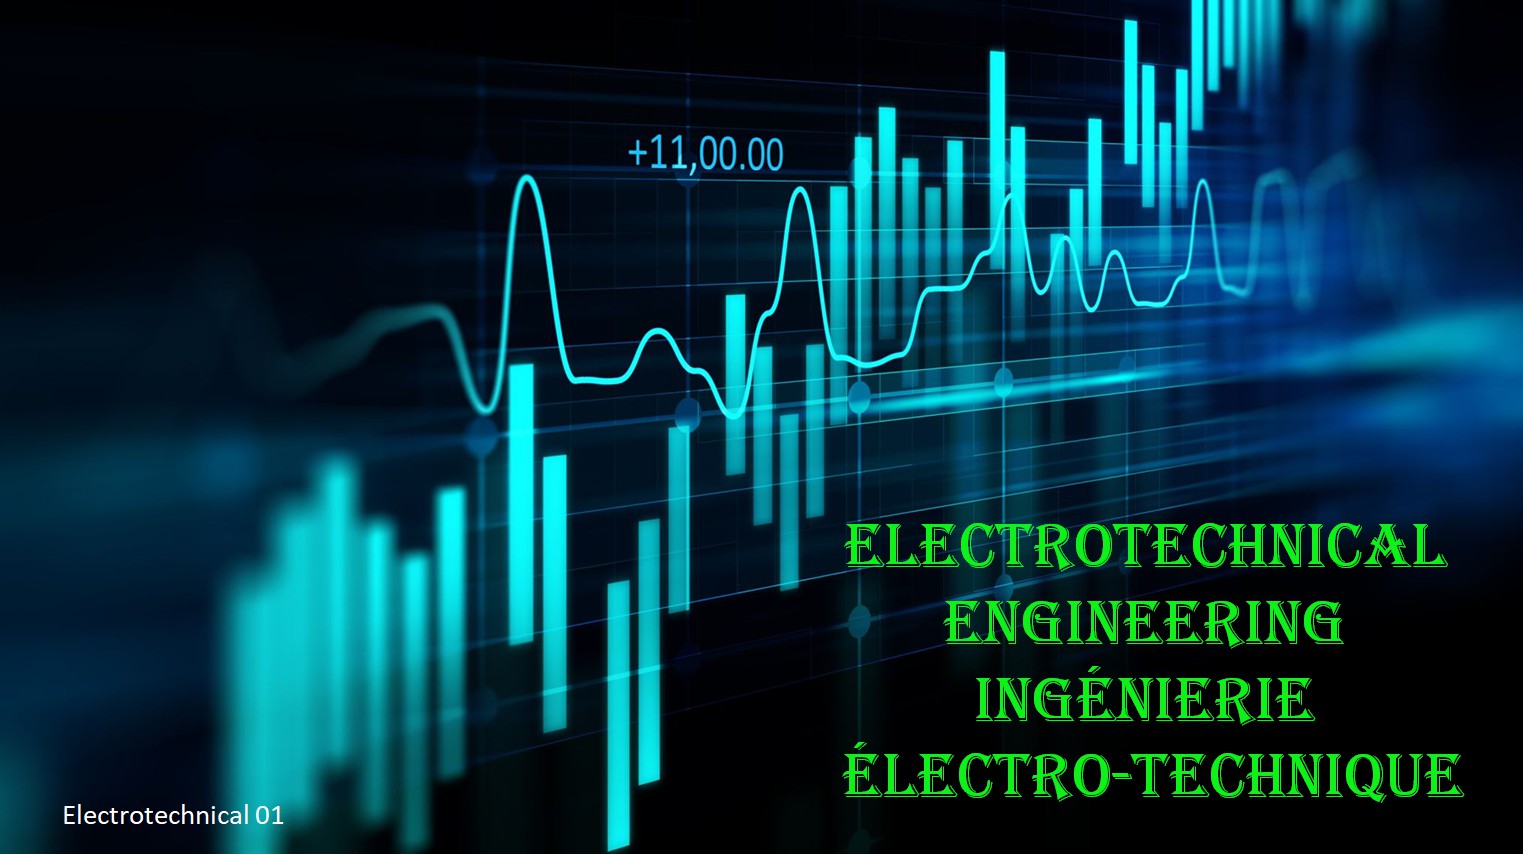 Electrotechnical 01